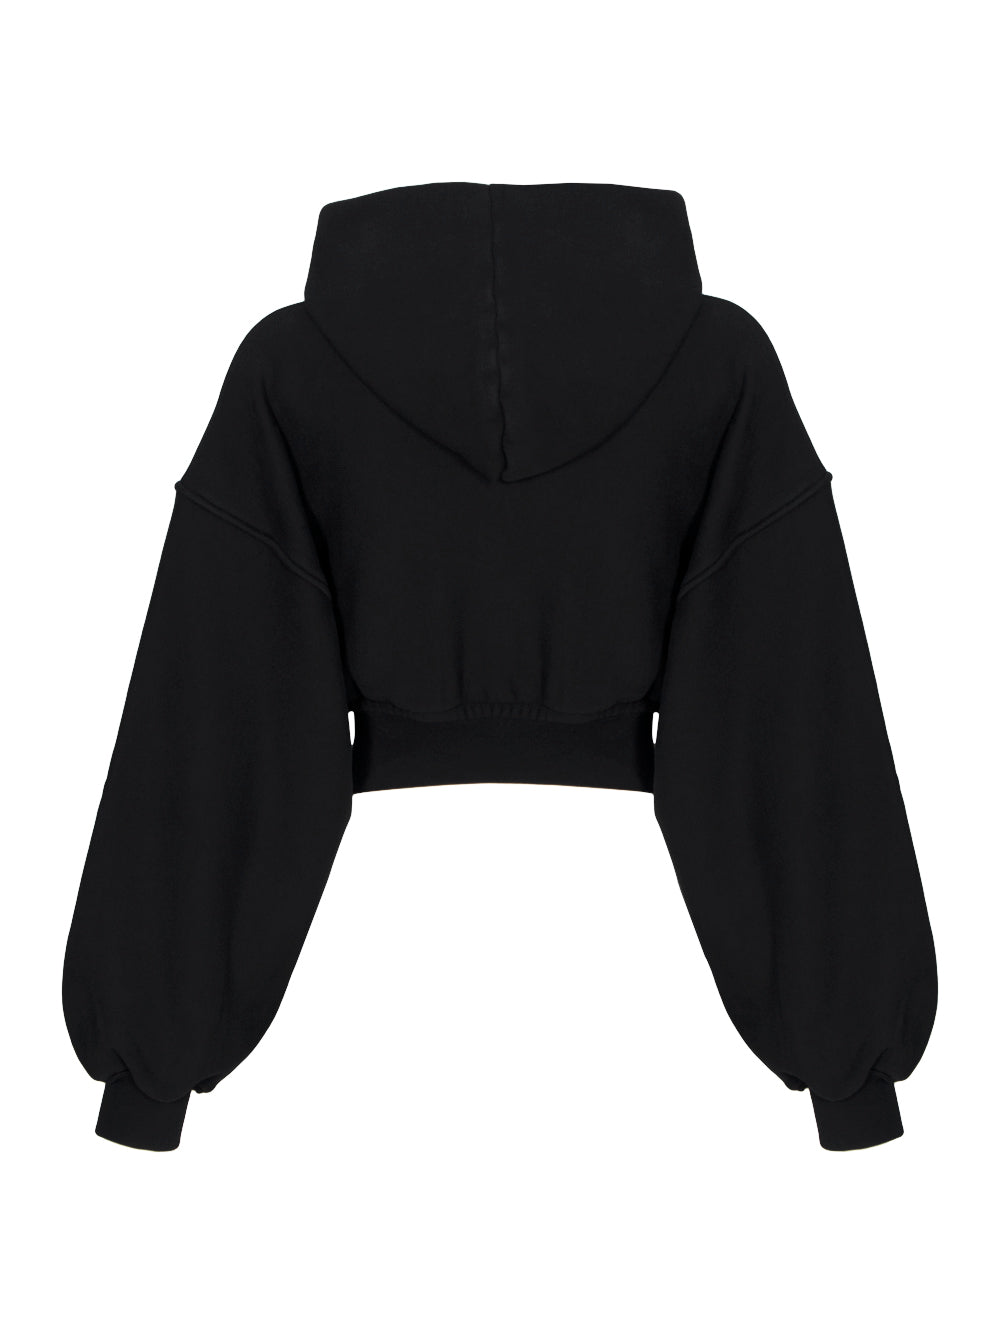 Cropped Zip Up Hoodie With Branded Seam Label Faded (Black)